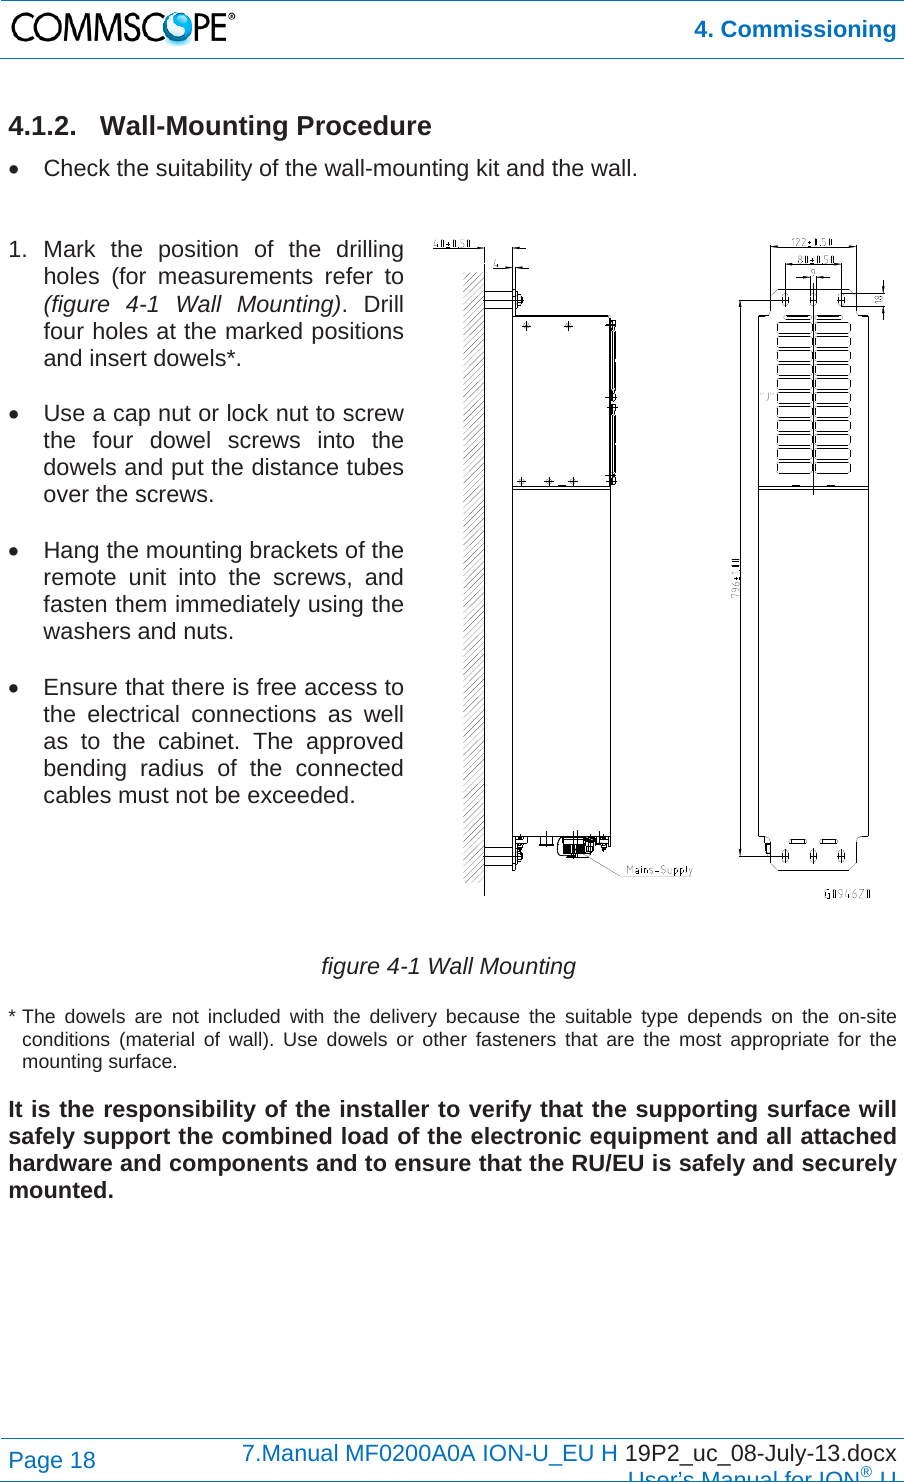  4. Commissioning Page 18  7.Manual MF0200A0A ION-U_EU H 19P2_uc_08-July-13.docx  User’s Manual for ION®U 4.1.2. Wall-Mounting Procedure   Check the suitability of the wall-mounting kit and the wall.   1. Mark the position of the drilling holes (for measurements refer to (figure 4-1 Wall Mounting). Drill four holes at the marked positions and insert dowels*.    Use a cap nut or lock nut to screw the four dowel screws into the dowels and put the distance tubes over the screws.    Hang the mounting brackets of the remote unit into the screws, and fasten them immediately using the washers and nuts.    Ensure that there is free access to the electrical connections as well as to the cabinet. The approved bending radius of the connected cables must not be exceeded.     figure 4-1 Wall Mounting  * The dowels are not included with the delivery because the suitable type depends on the on-site conditions (material of wall). Use dowels or other fasteners that are the most appropriate for the mounting surface.  It is the responsibility of the installer to verify that the supporting surface will safely support the combined load of the electronic equipment and all attached hardware and components and to ensure that the RU/EU is safely and securely mounted.    